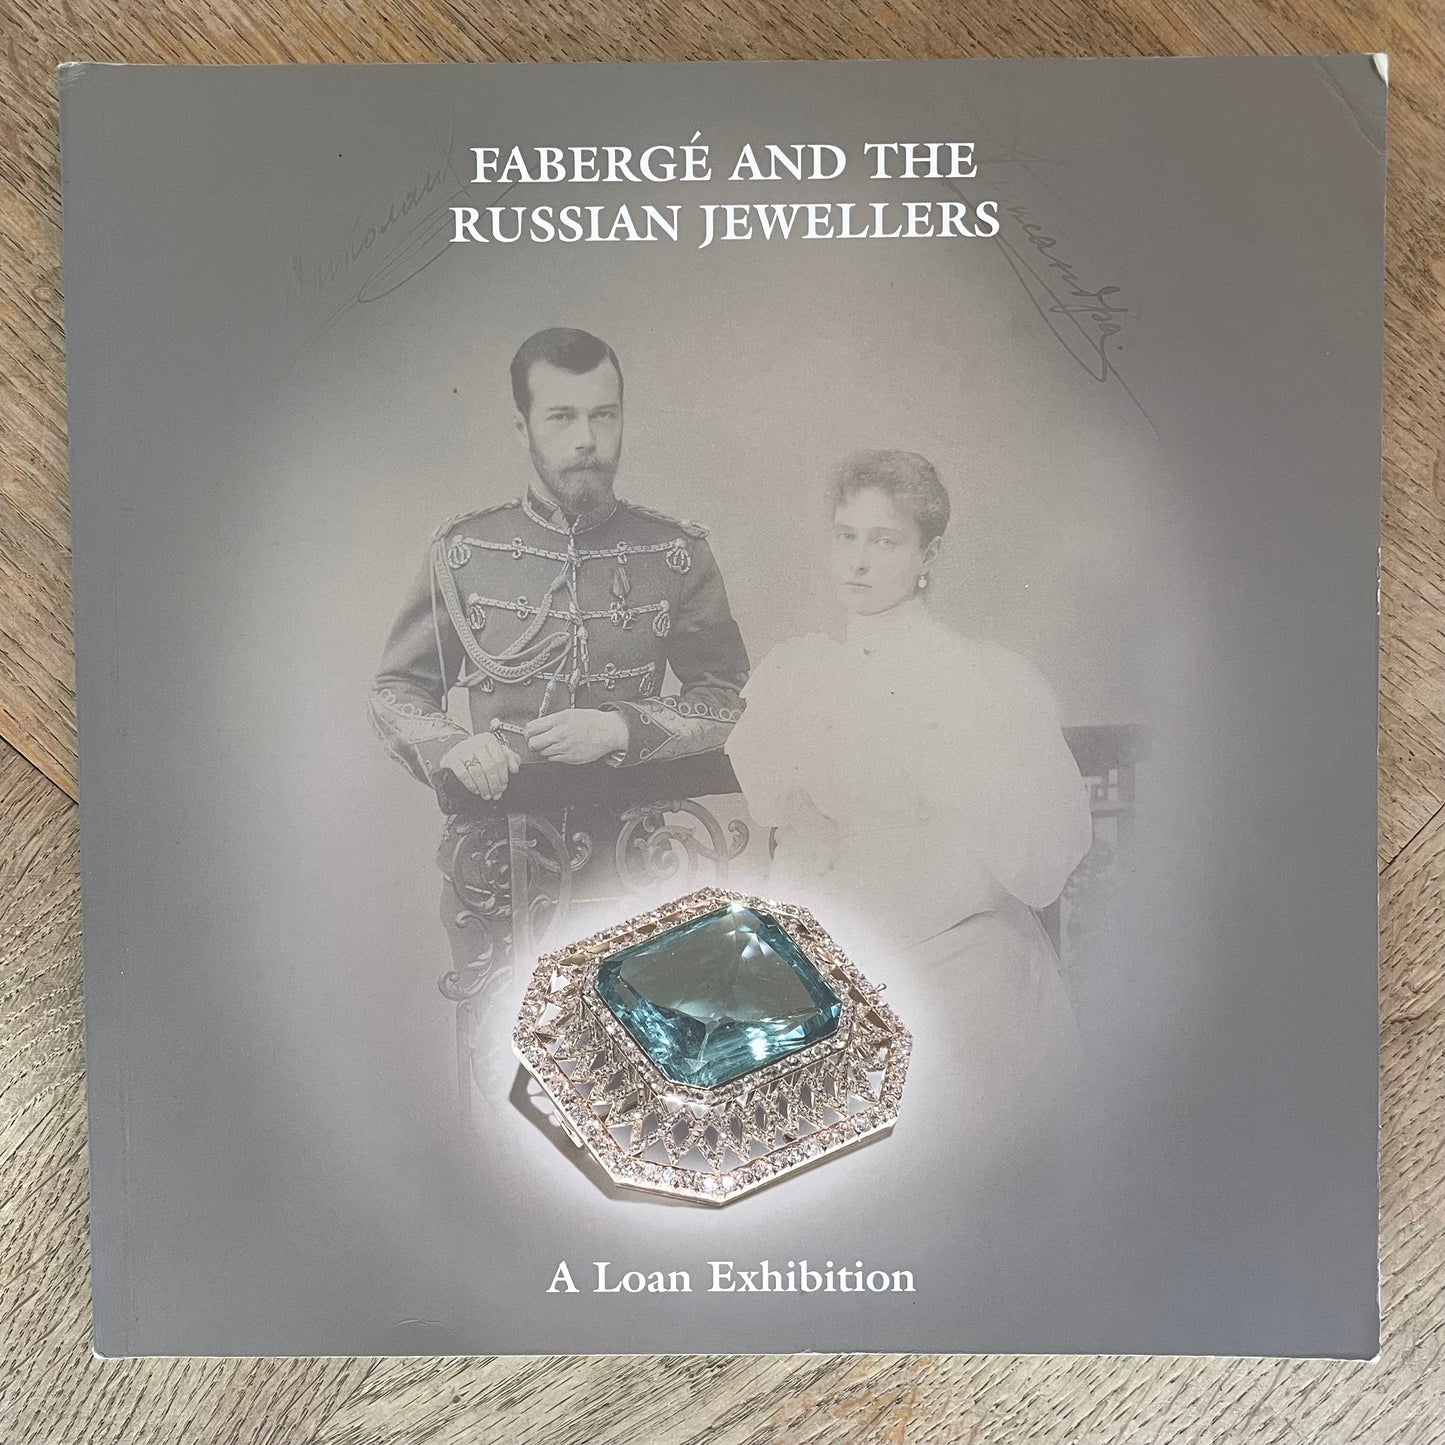 Fabergé and the Russian Jewellers - A Loan Exhibition